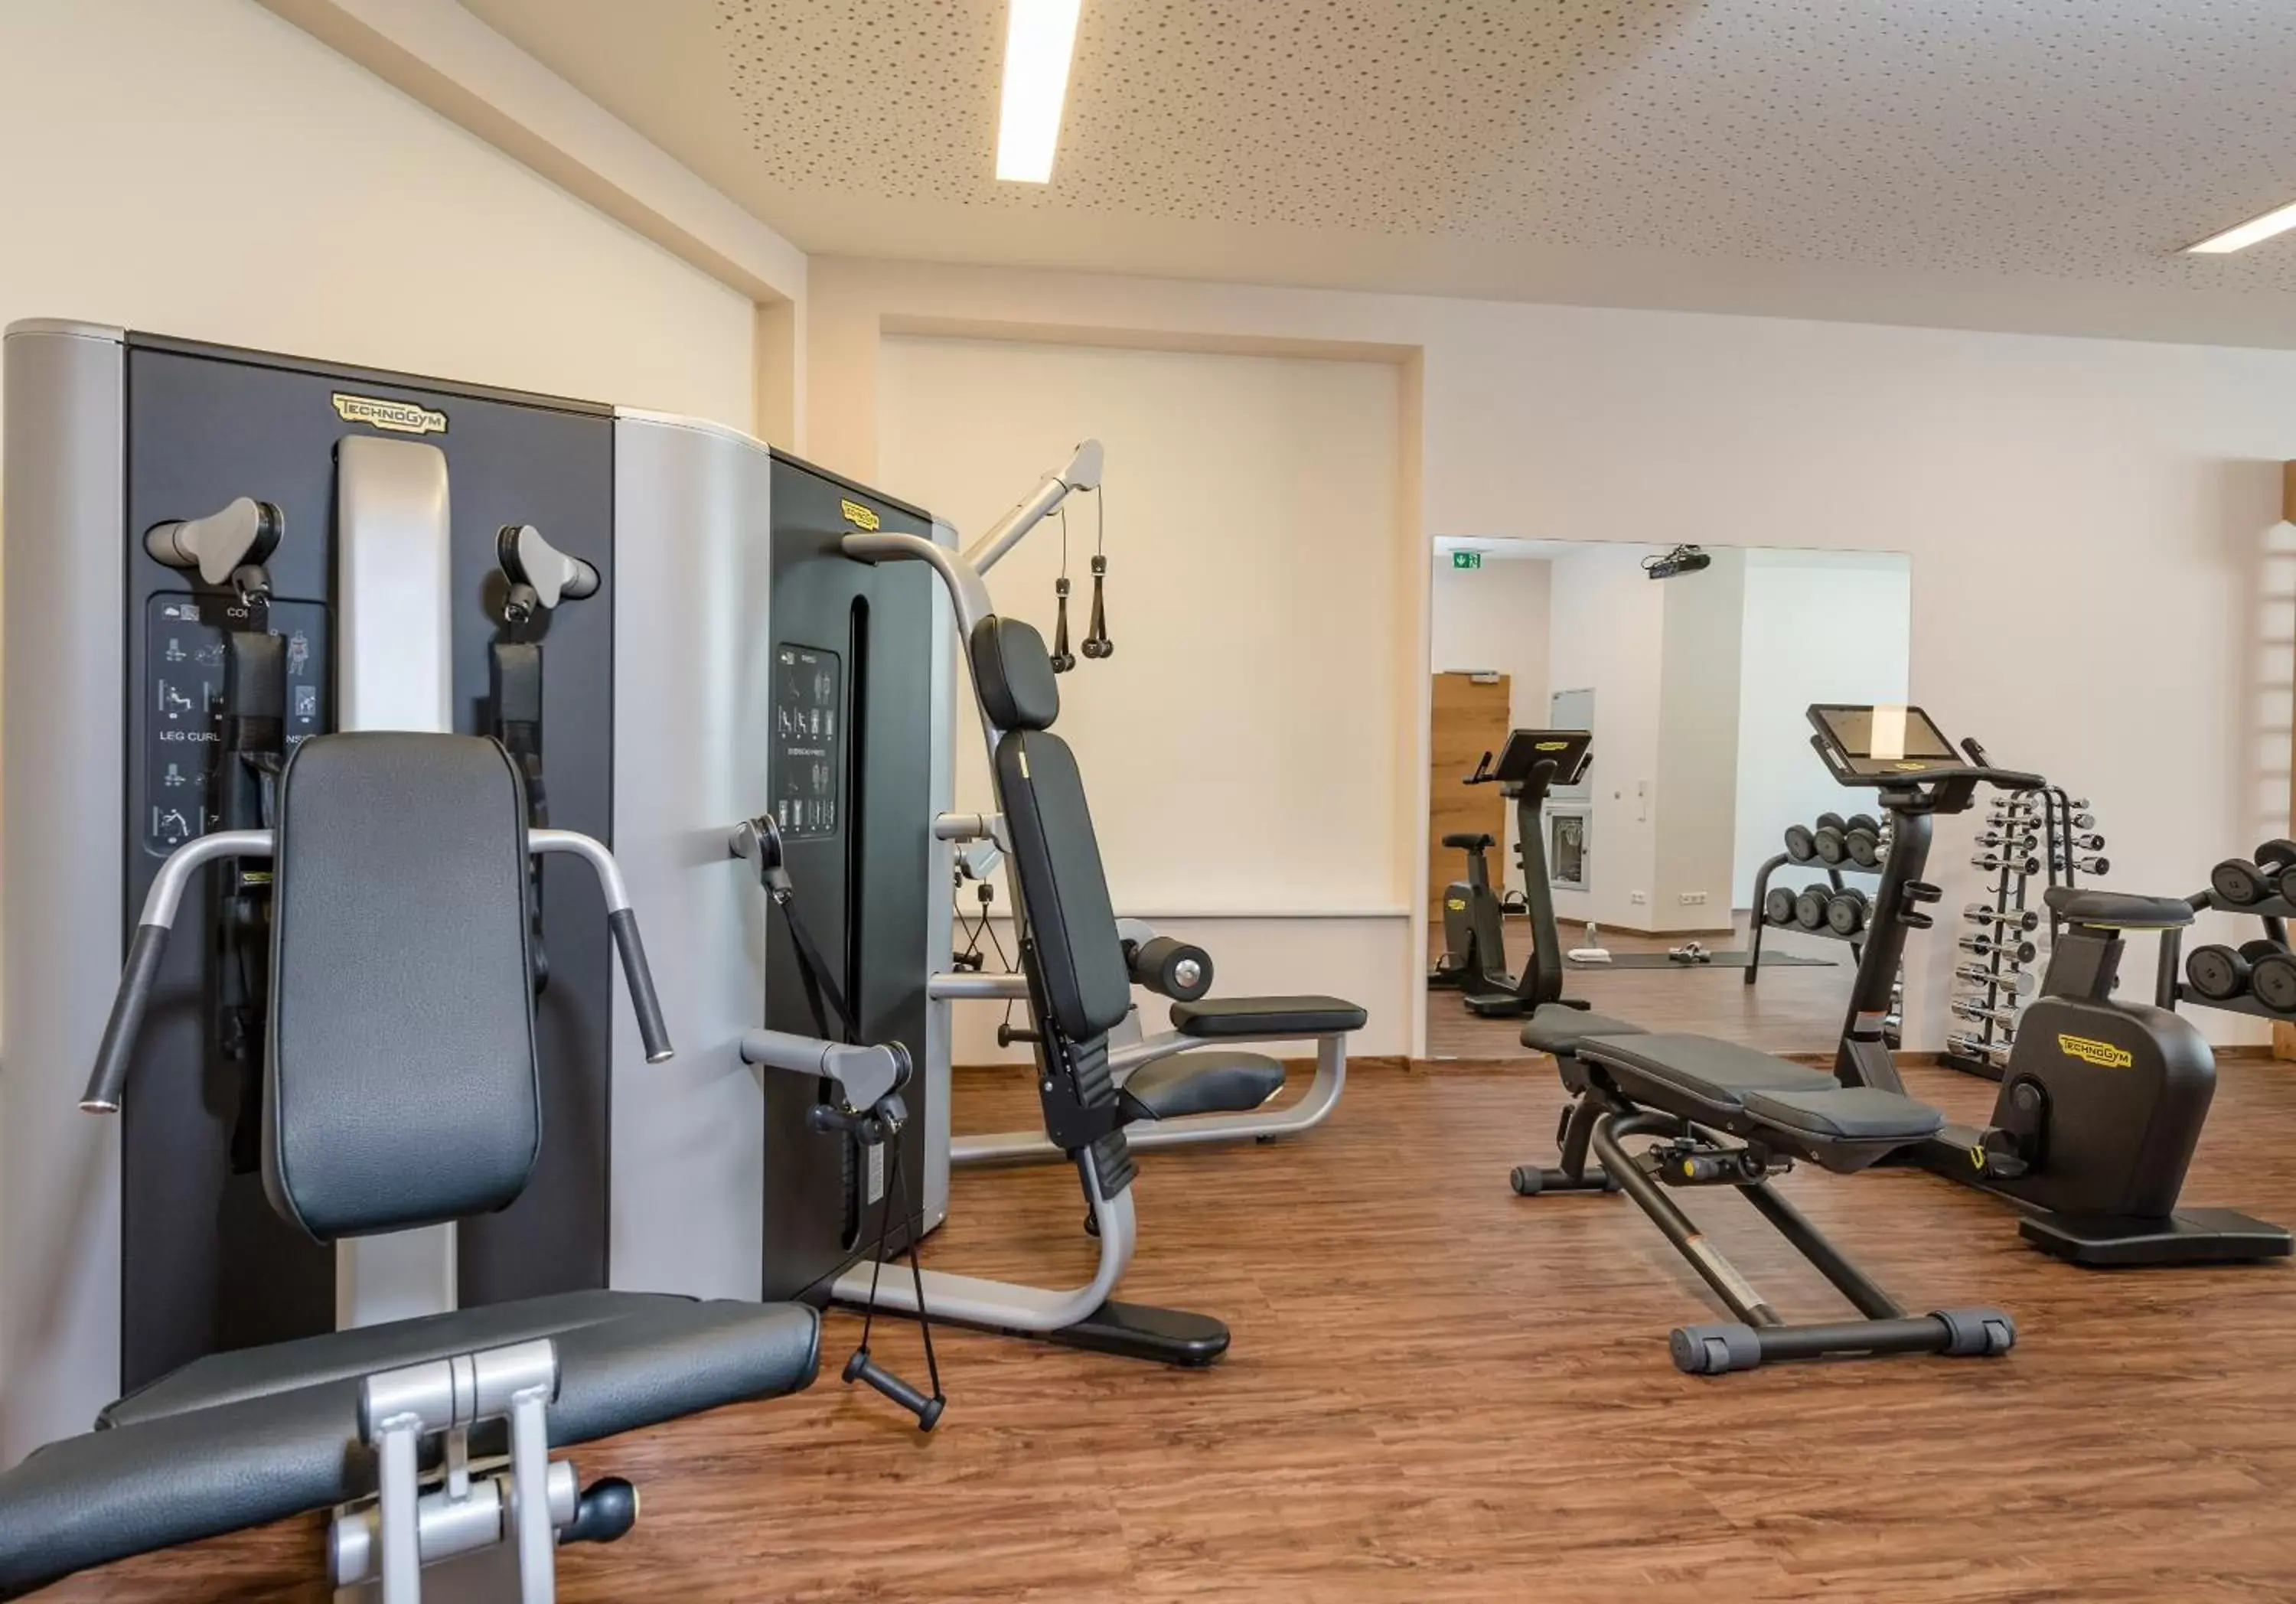 Fitness centre/facilities, Fitness Center/Facilities in Hotel Norica - Thermenhotels Gastein mit dem Bademantel direkt in die Therme